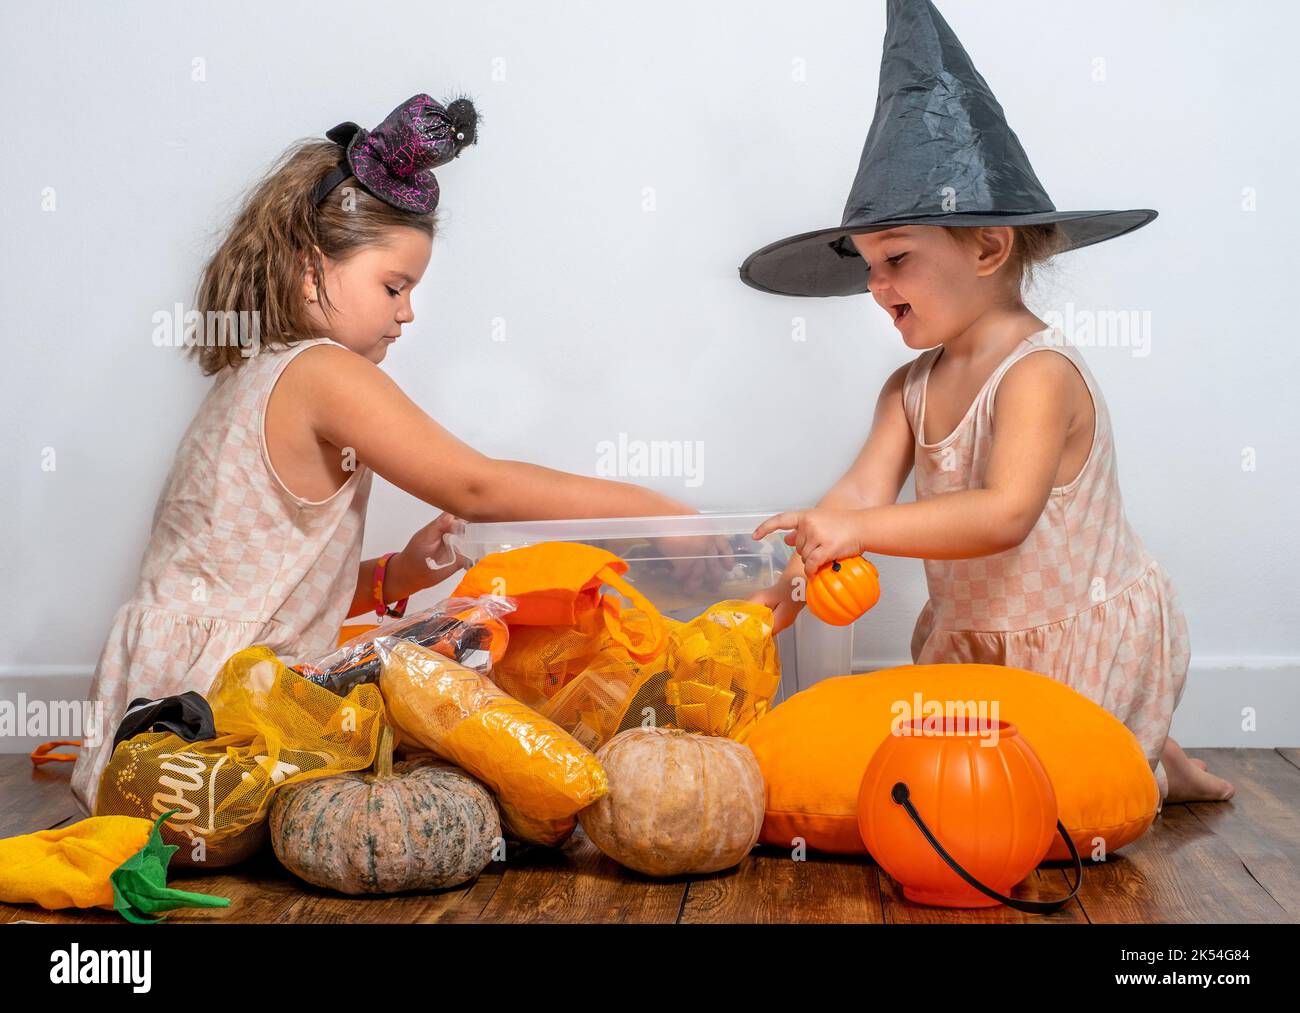 Children take apart a container of Halloween decorations Stock Photo